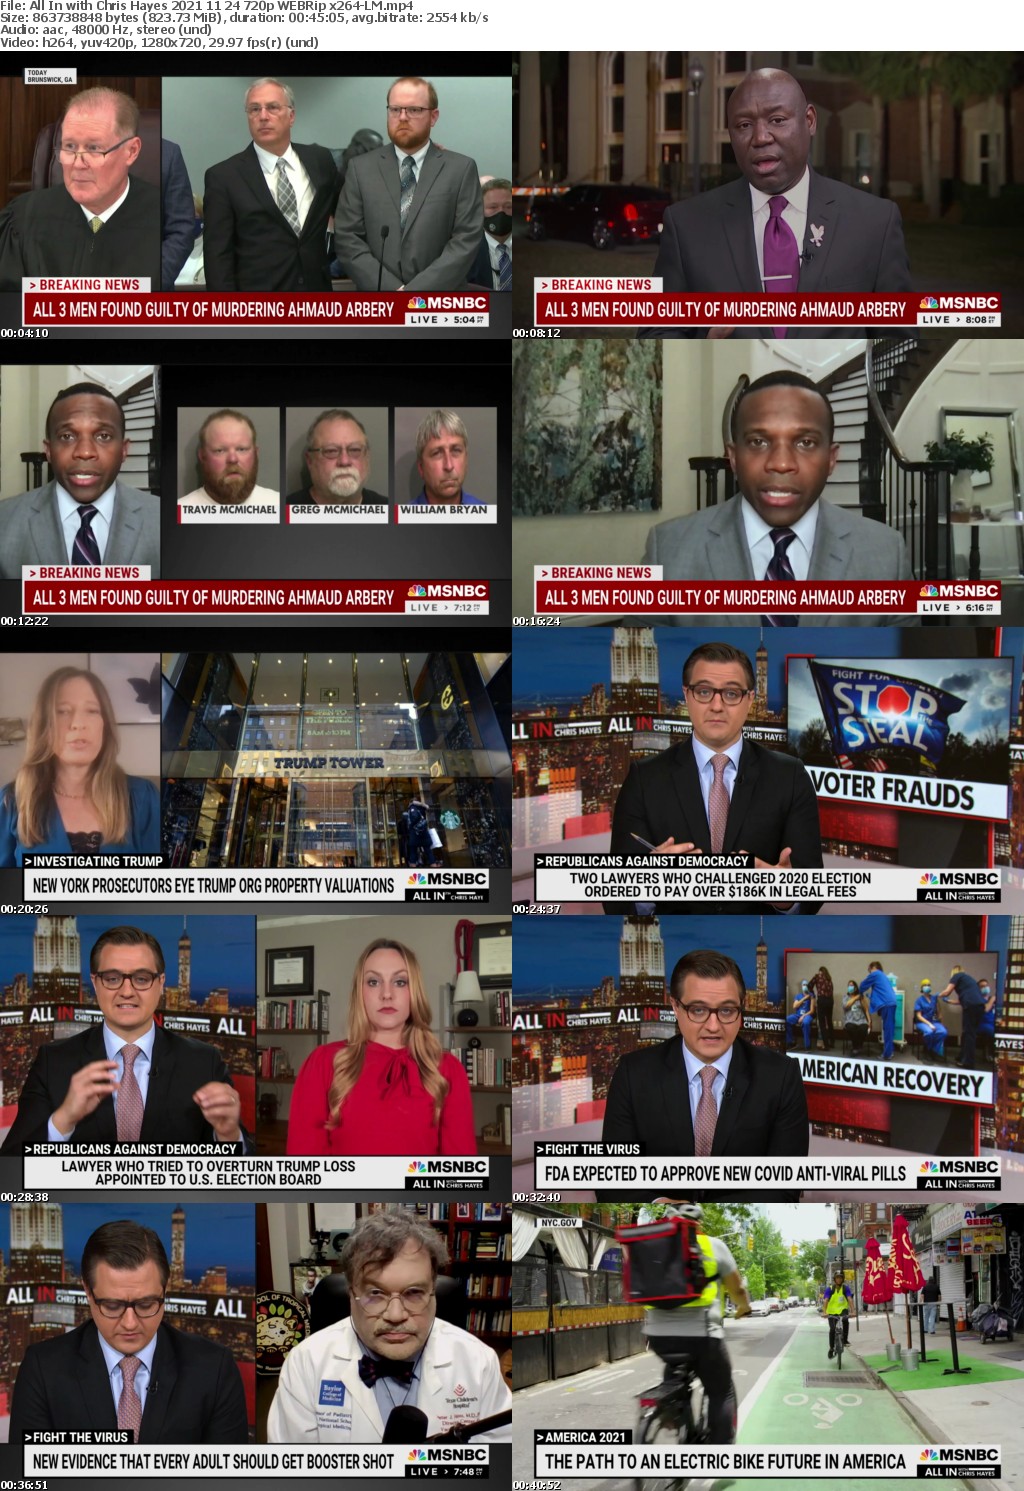 All In with Chris Hayes 2021 11 24 720p WEBRip x264-LM